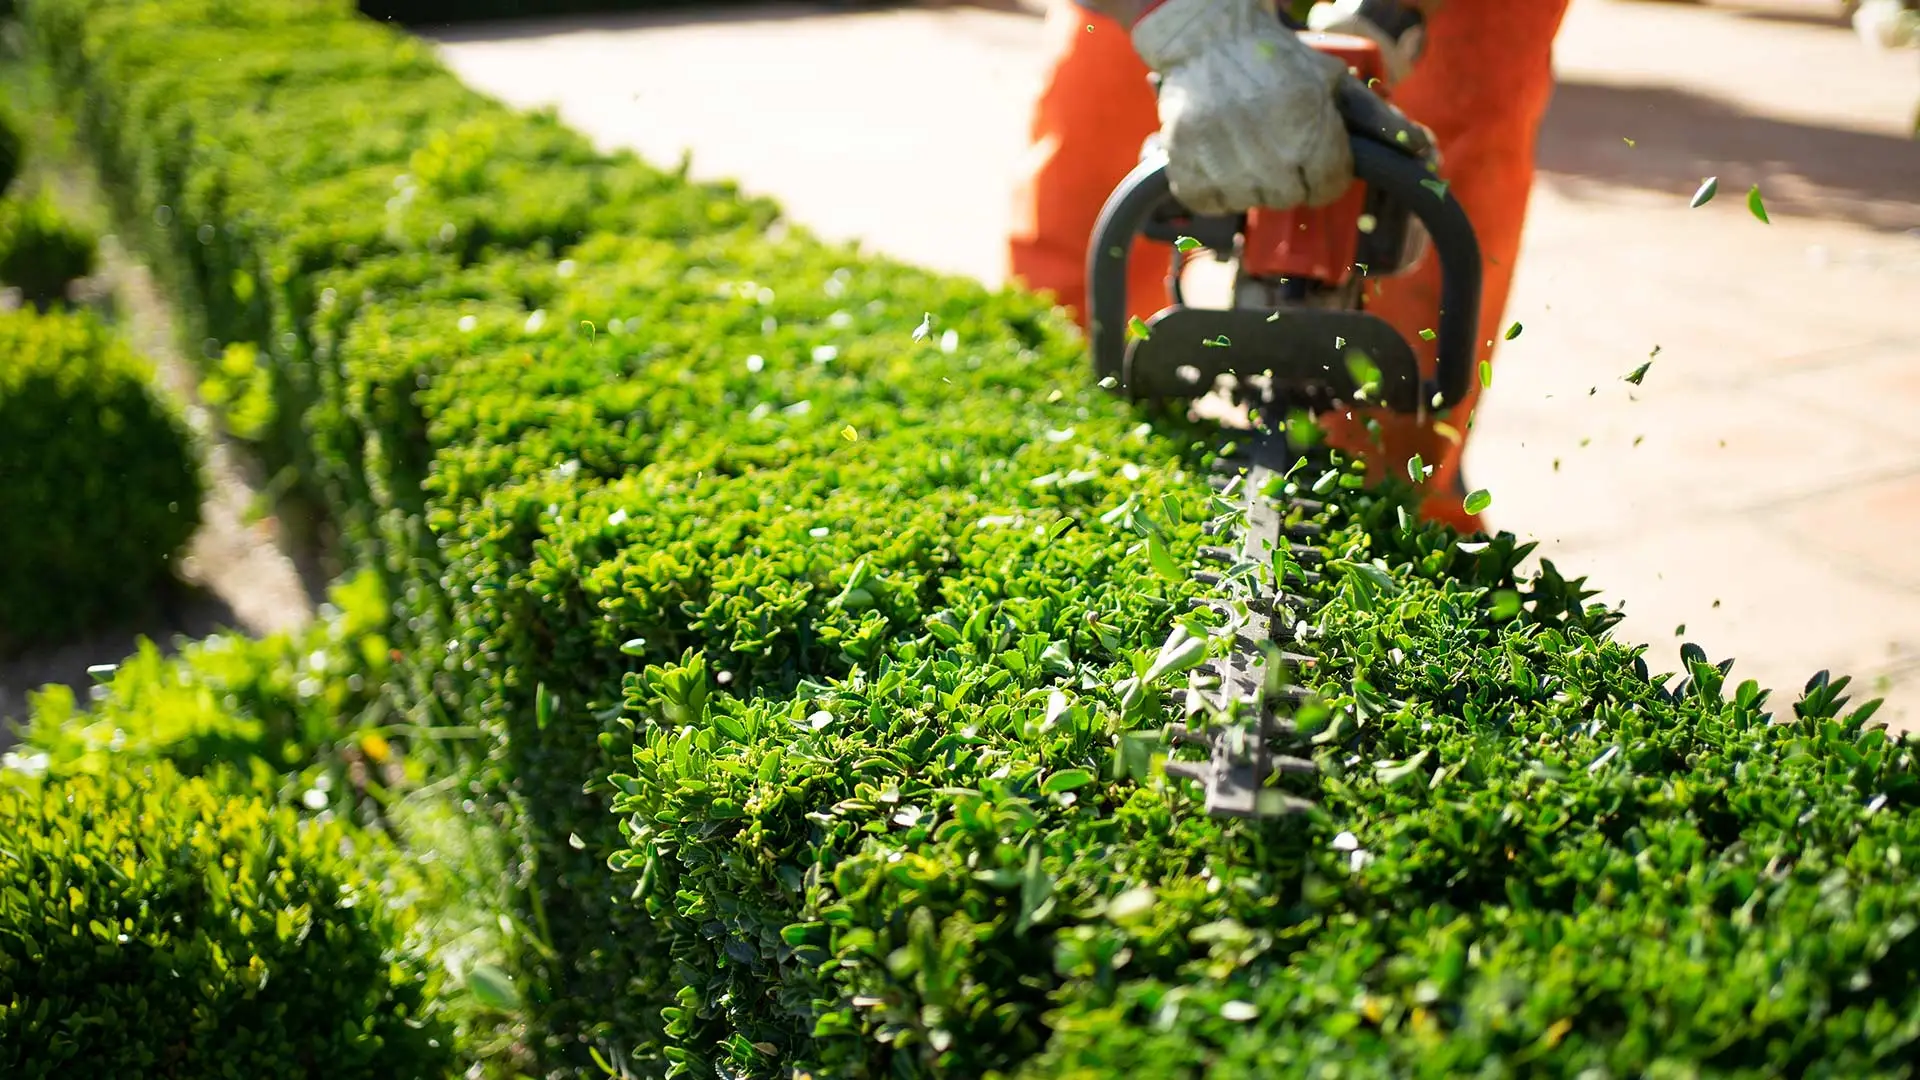 Landscaping hedge trimmer shaping a hedge into a cleanly cut form.